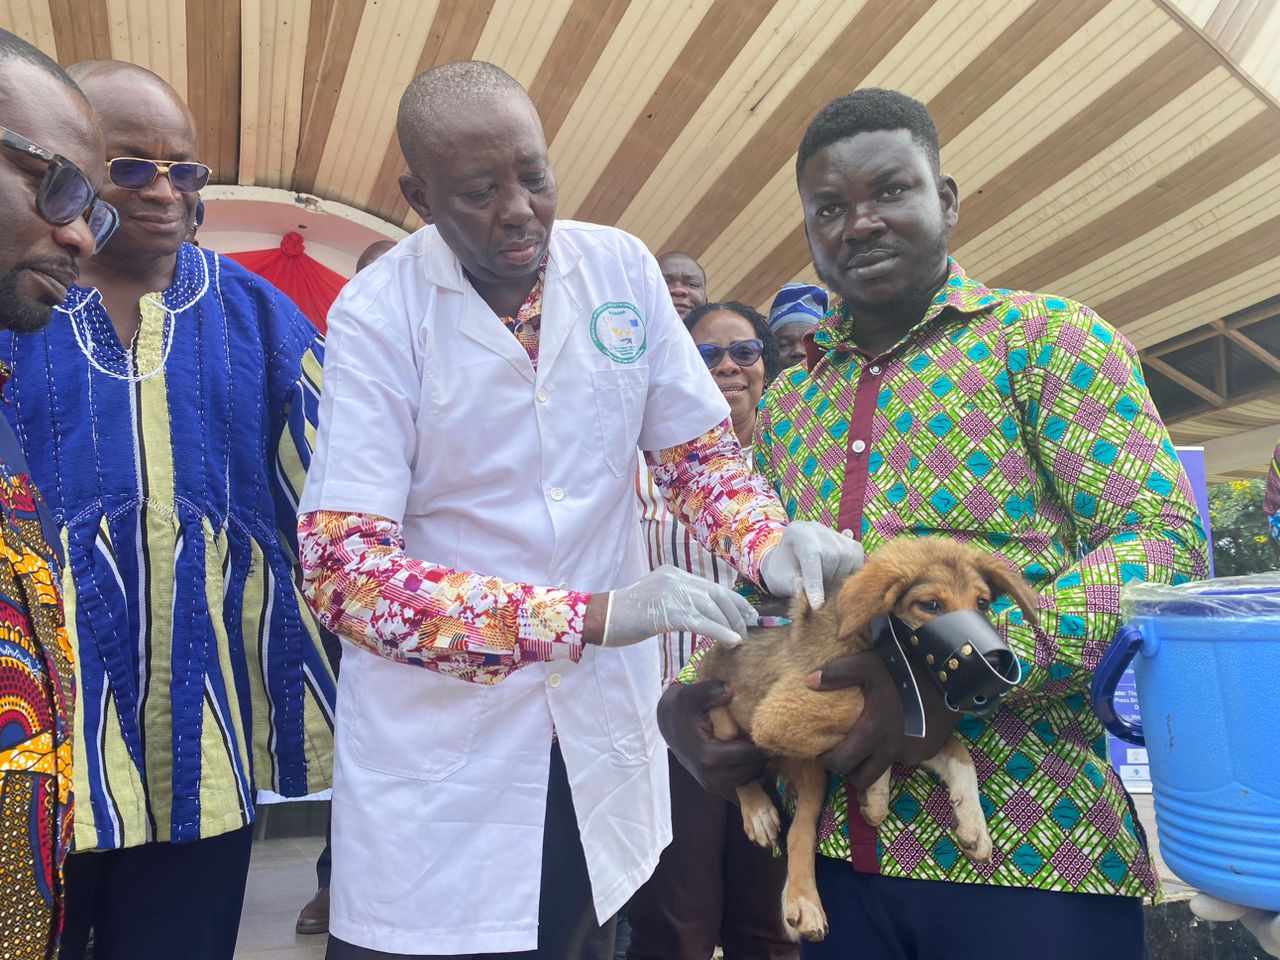 Dr Patrick Abakeh, acting Director of the Veterinary Services, vaccinating a dog to mark World Rabies Day in Bolgatanga